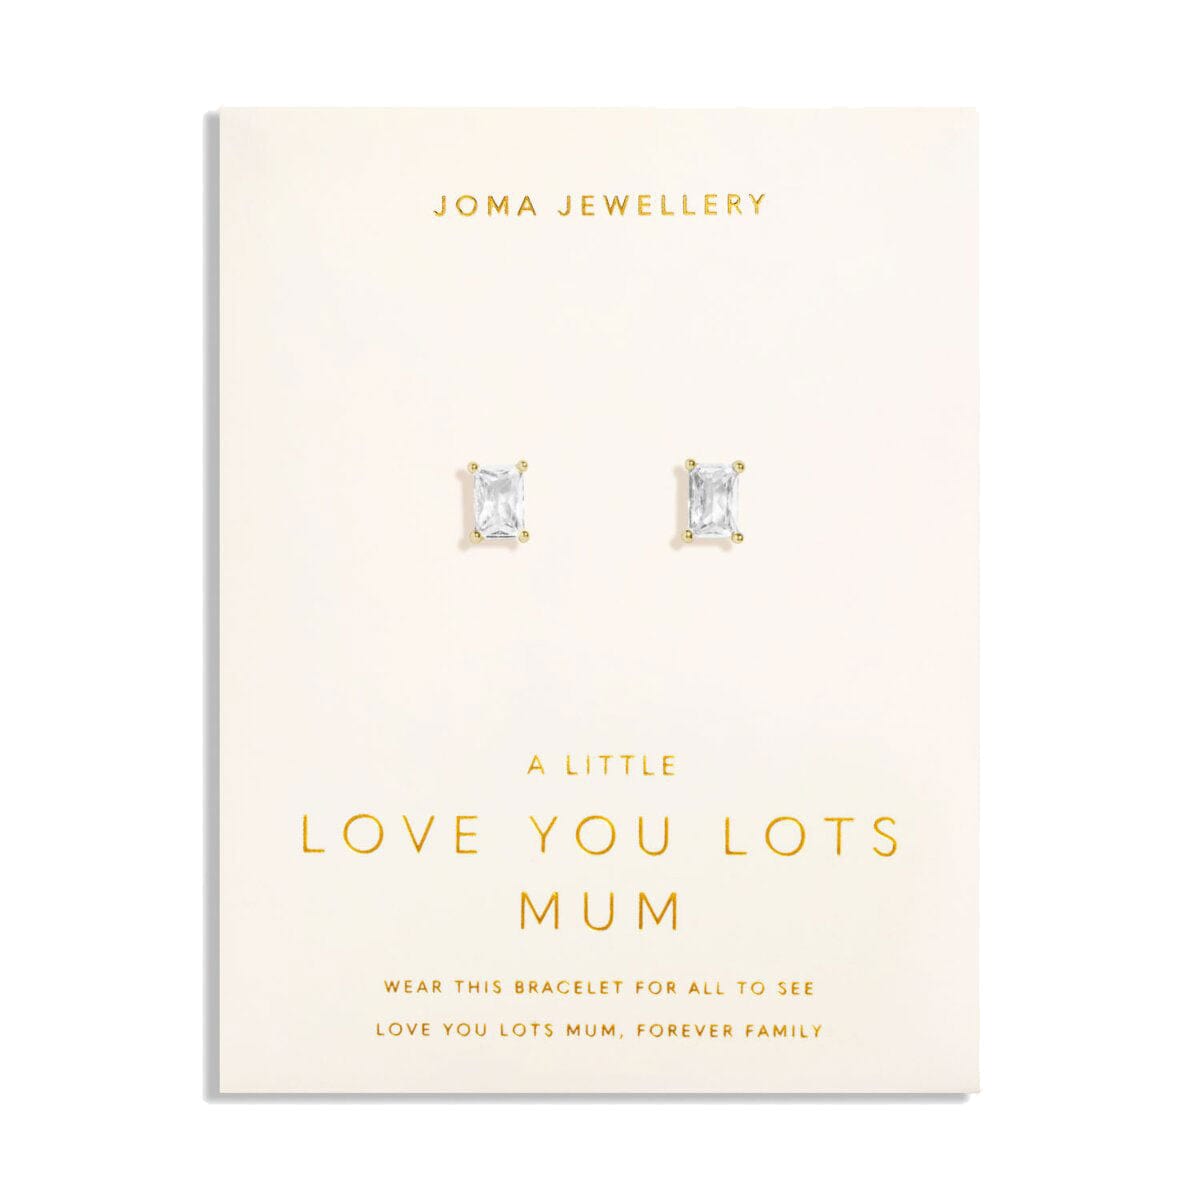 Joma Jewellery Earrings Joma Jewellery Love From Your Little Ones 'Love You Lots Mum' Gold Plated Stud Earrings